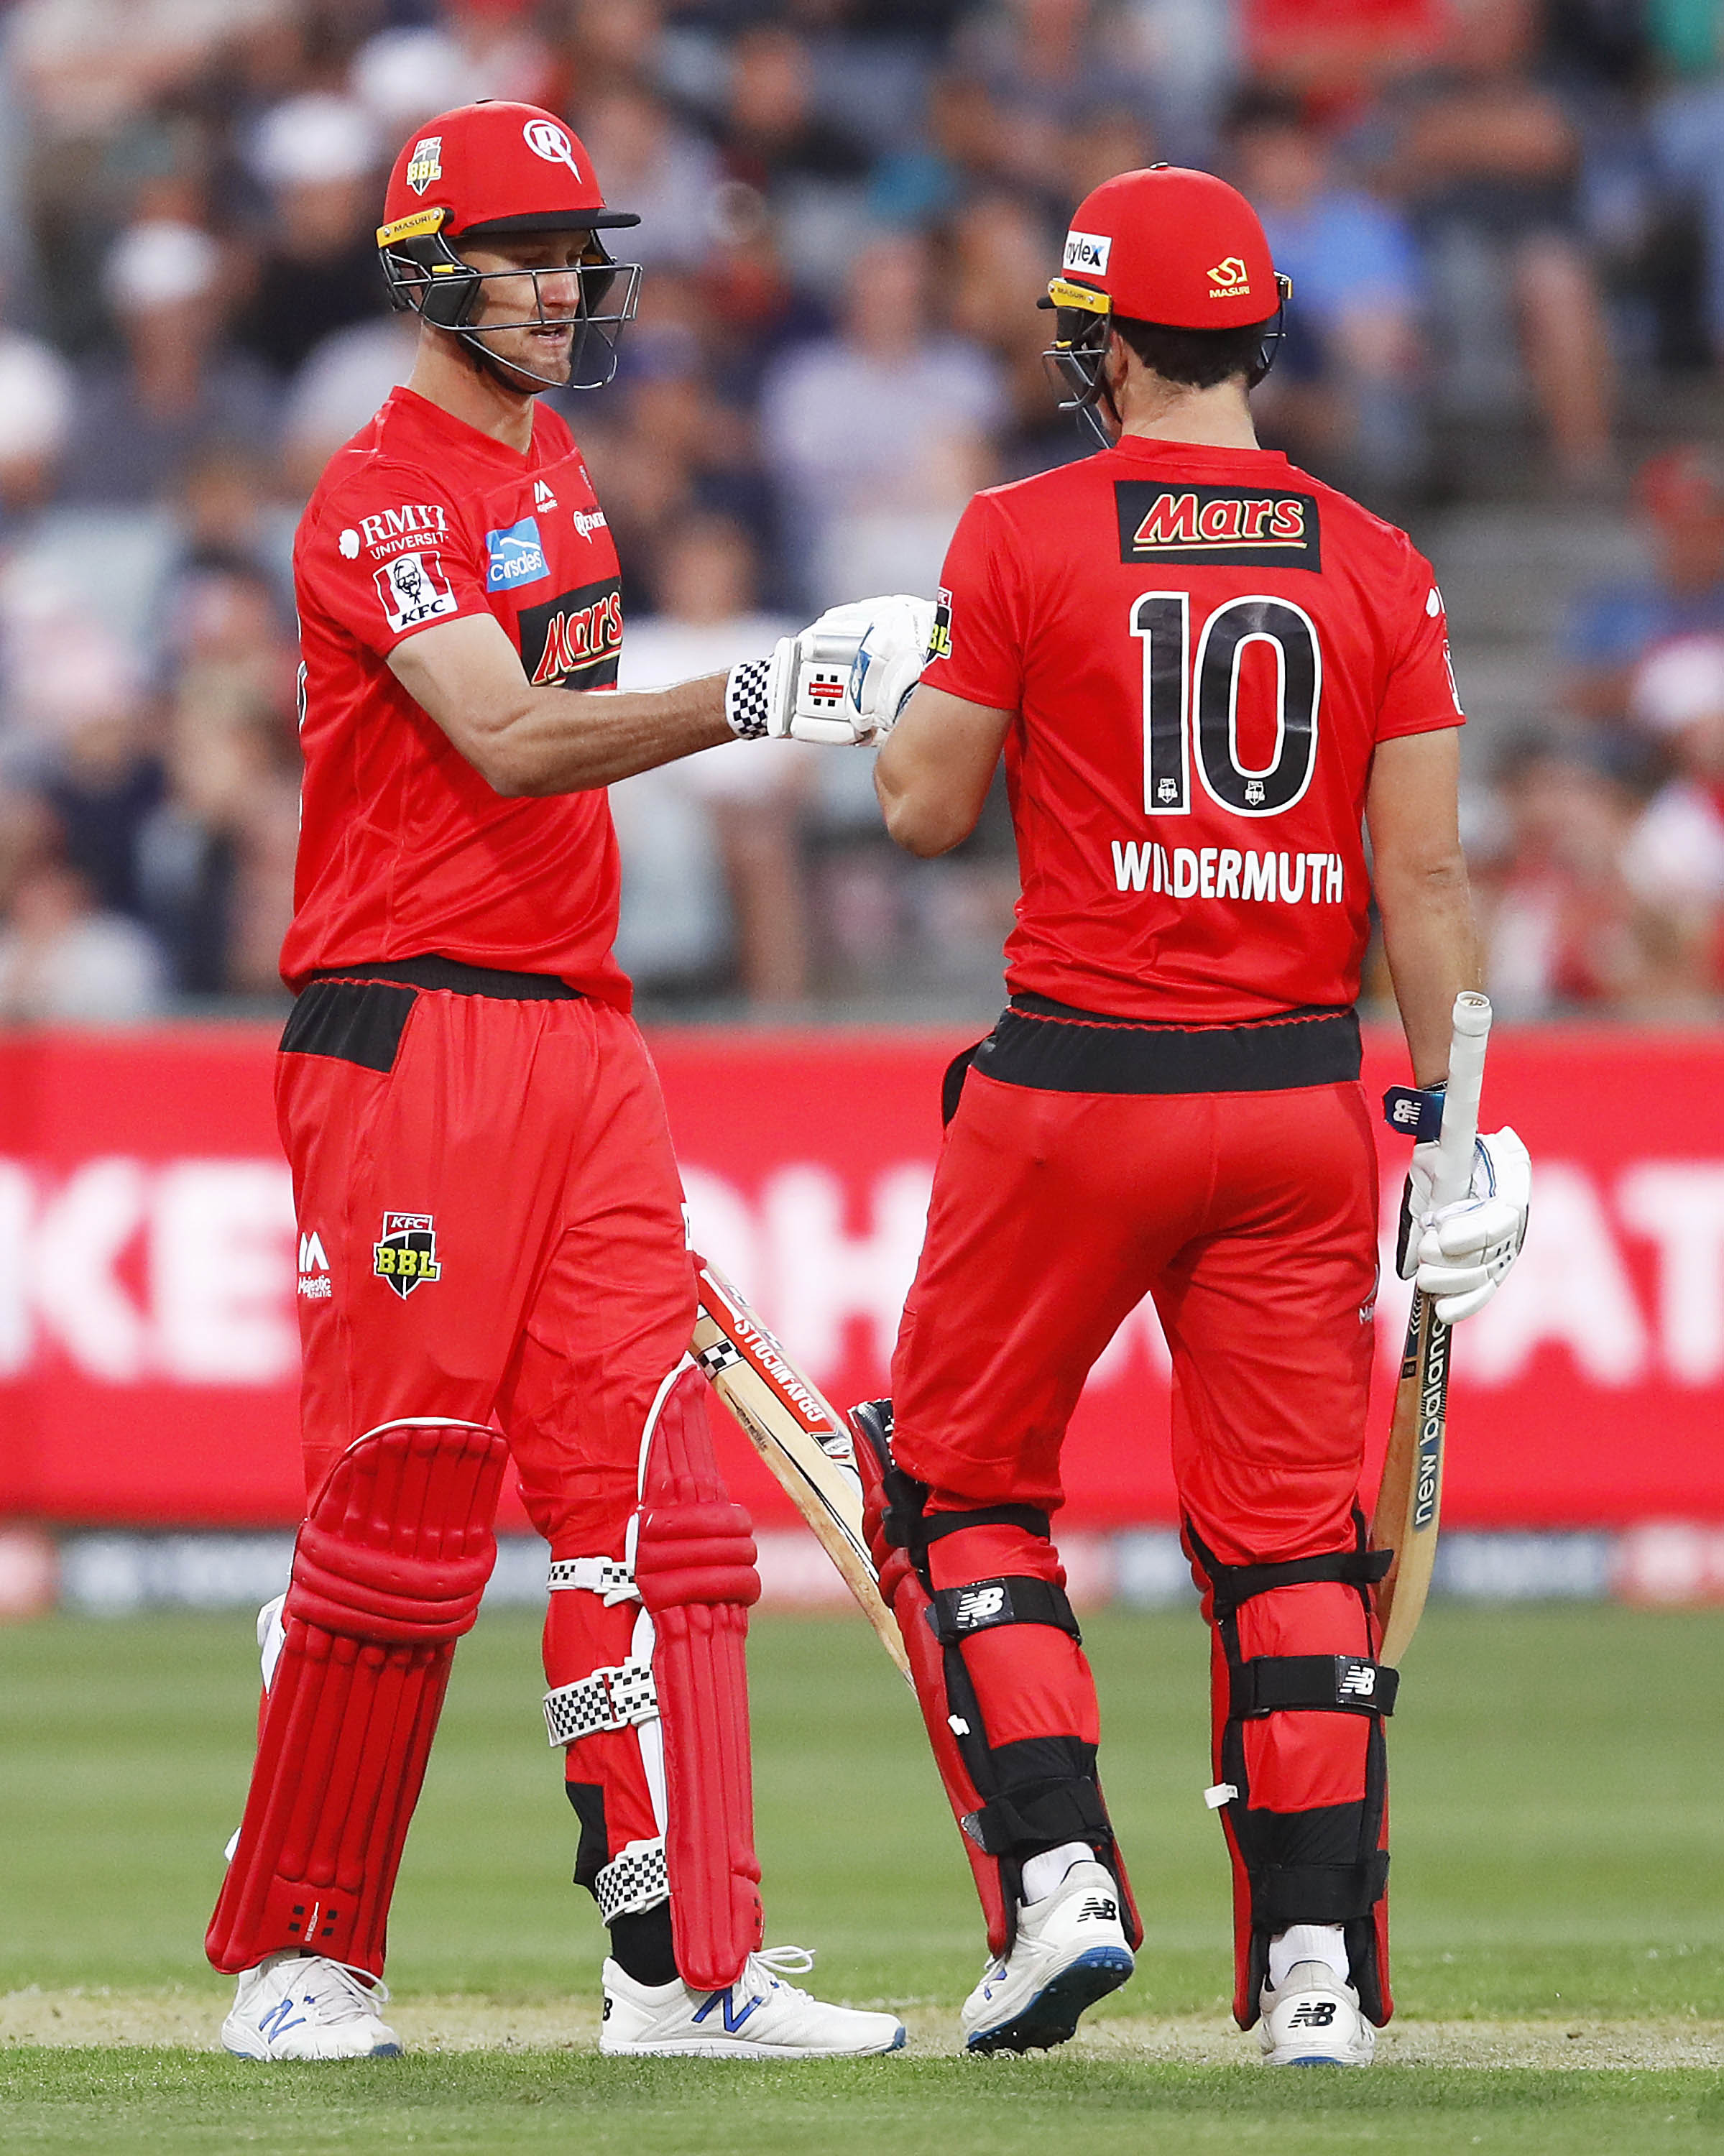 MELBOURNE, AUSTRALIA - DECEMBER 19: Beau Webster of the Renegades (L) and Jack Wildermuth of the Renegades high five during the Big Bash League match between the Melbourne Renegades and the Sydney Thunder at GMHBA Stadium on December 19, 2019 in Melbourne, Australia. (Photo by Daniel Pockett/Getty Images)